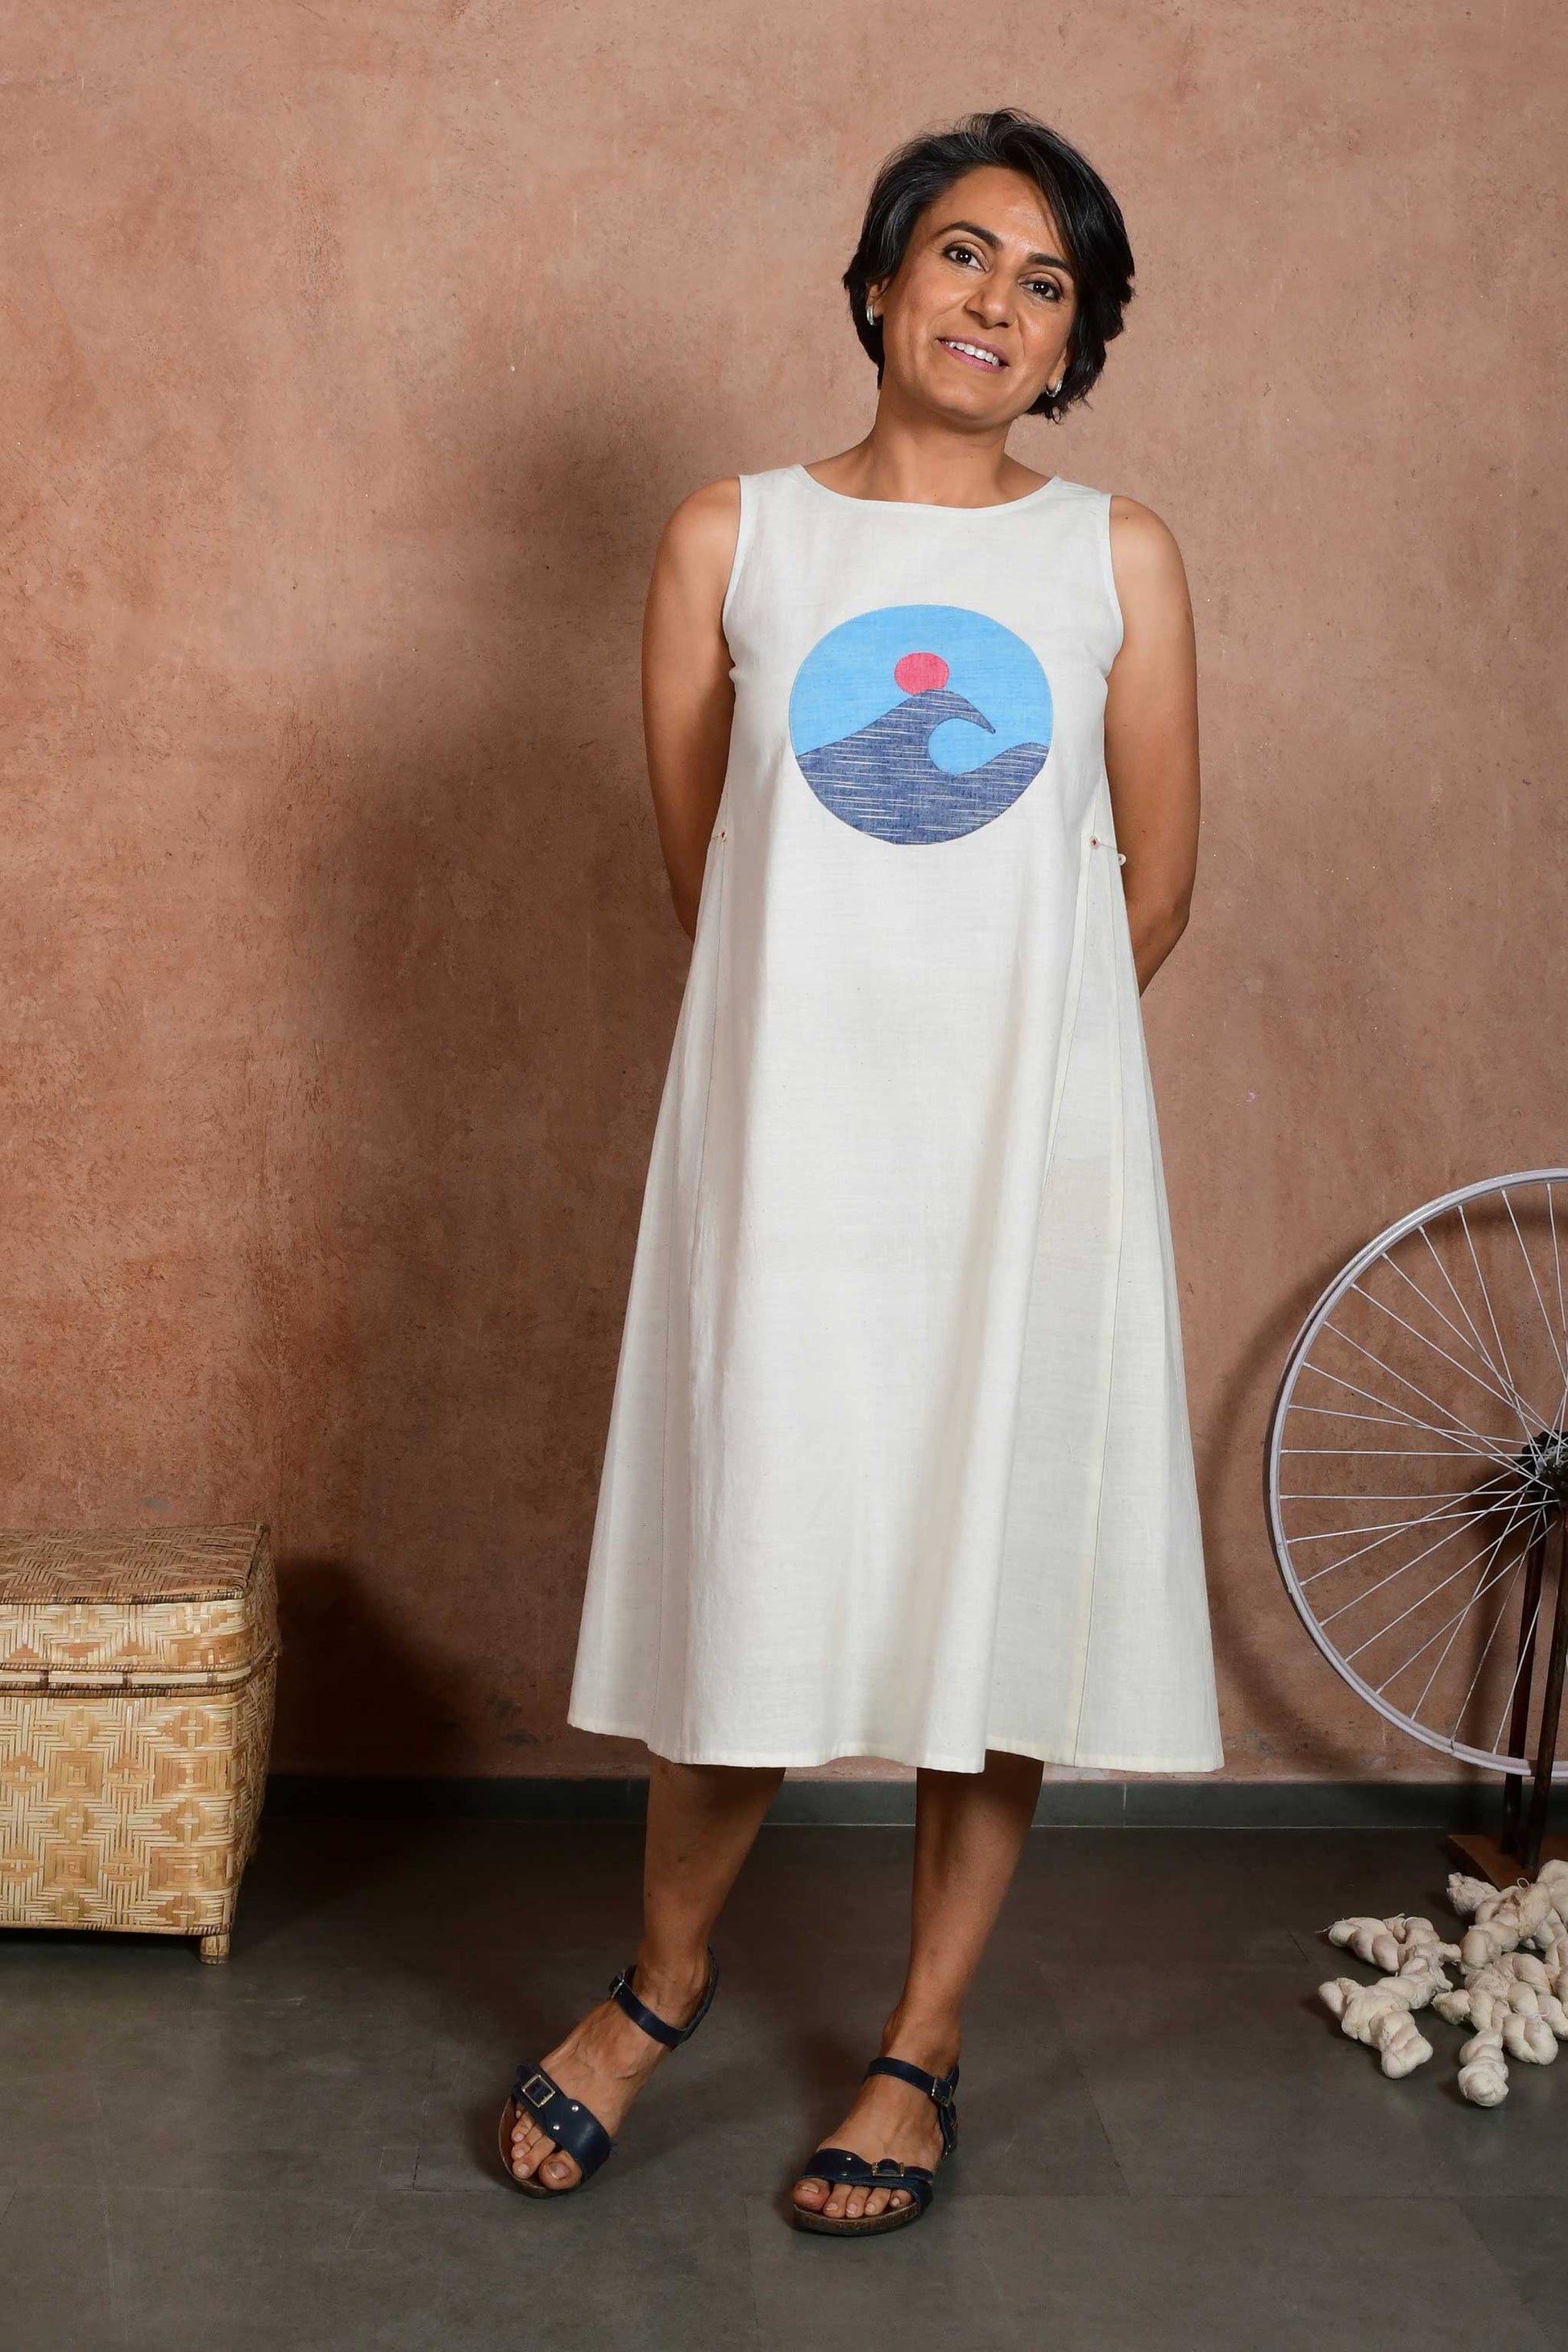 Front pose of a smiling middle aged woman wearing a knee length dress made of off white handspun handloom cotton fabric with a circular applique patch showing a wave in the sea with sun in the back.